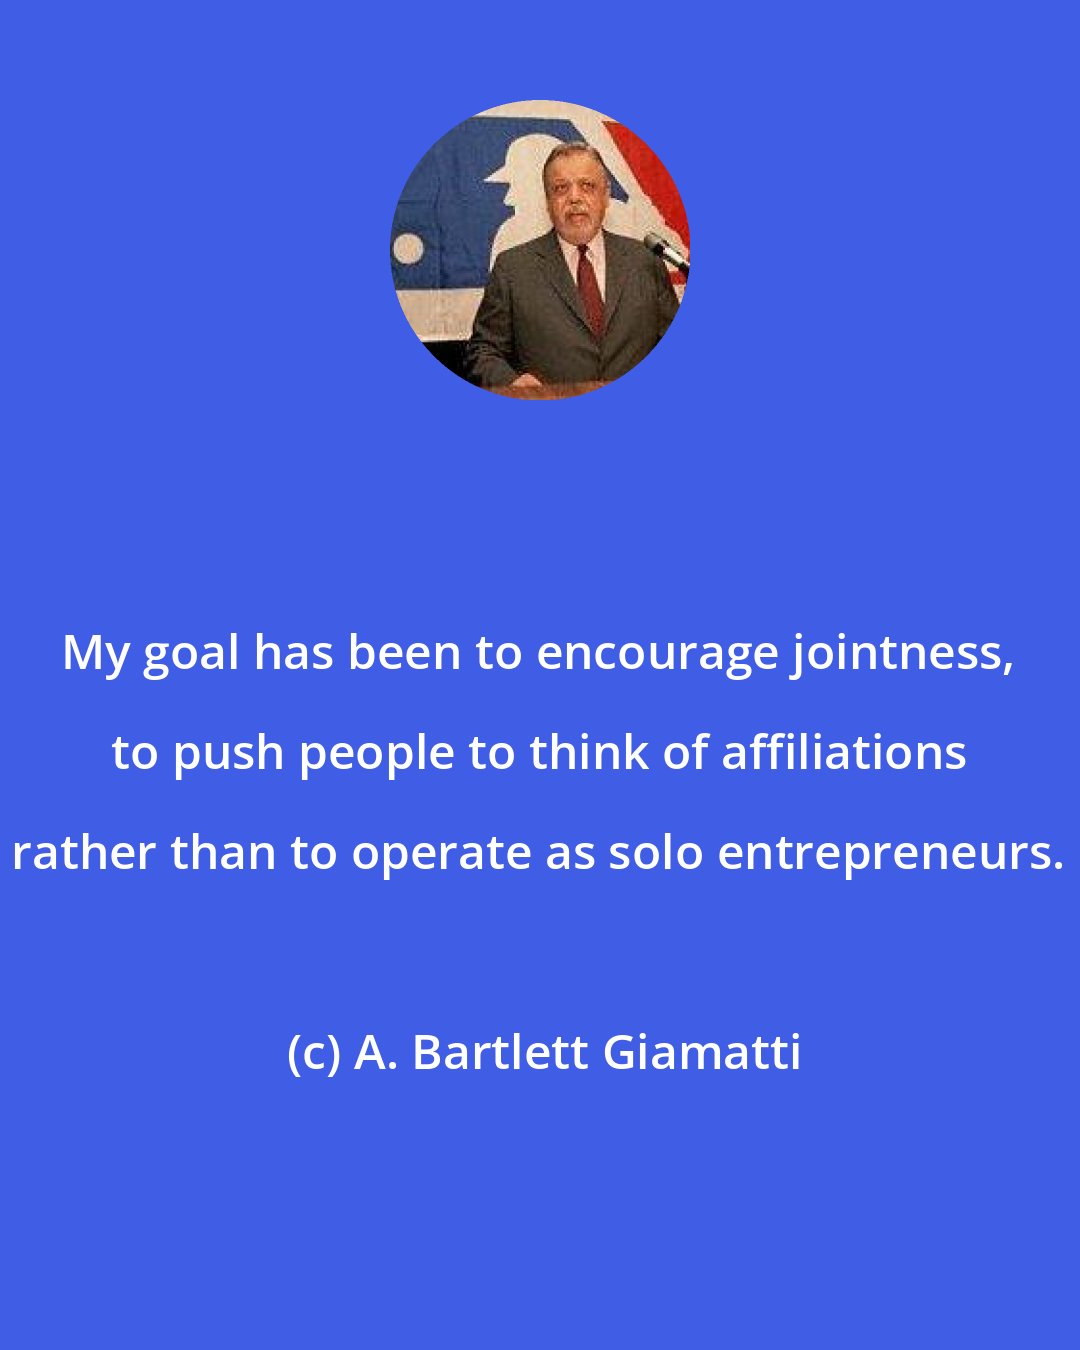 A. Bartlett Giamatti: My goal has been to encourage jointness, to push people to think of affiliations rather than to operate as solo entrepreneurs.